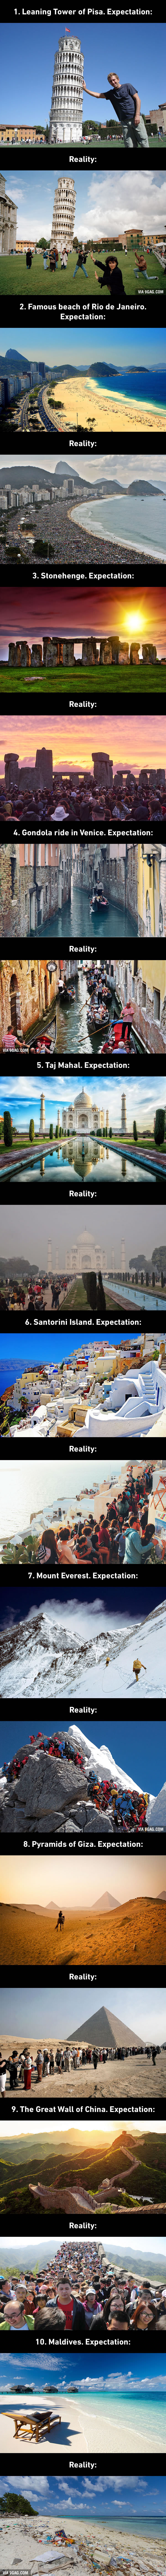 Top 10 Travel Expectations Vs Reality